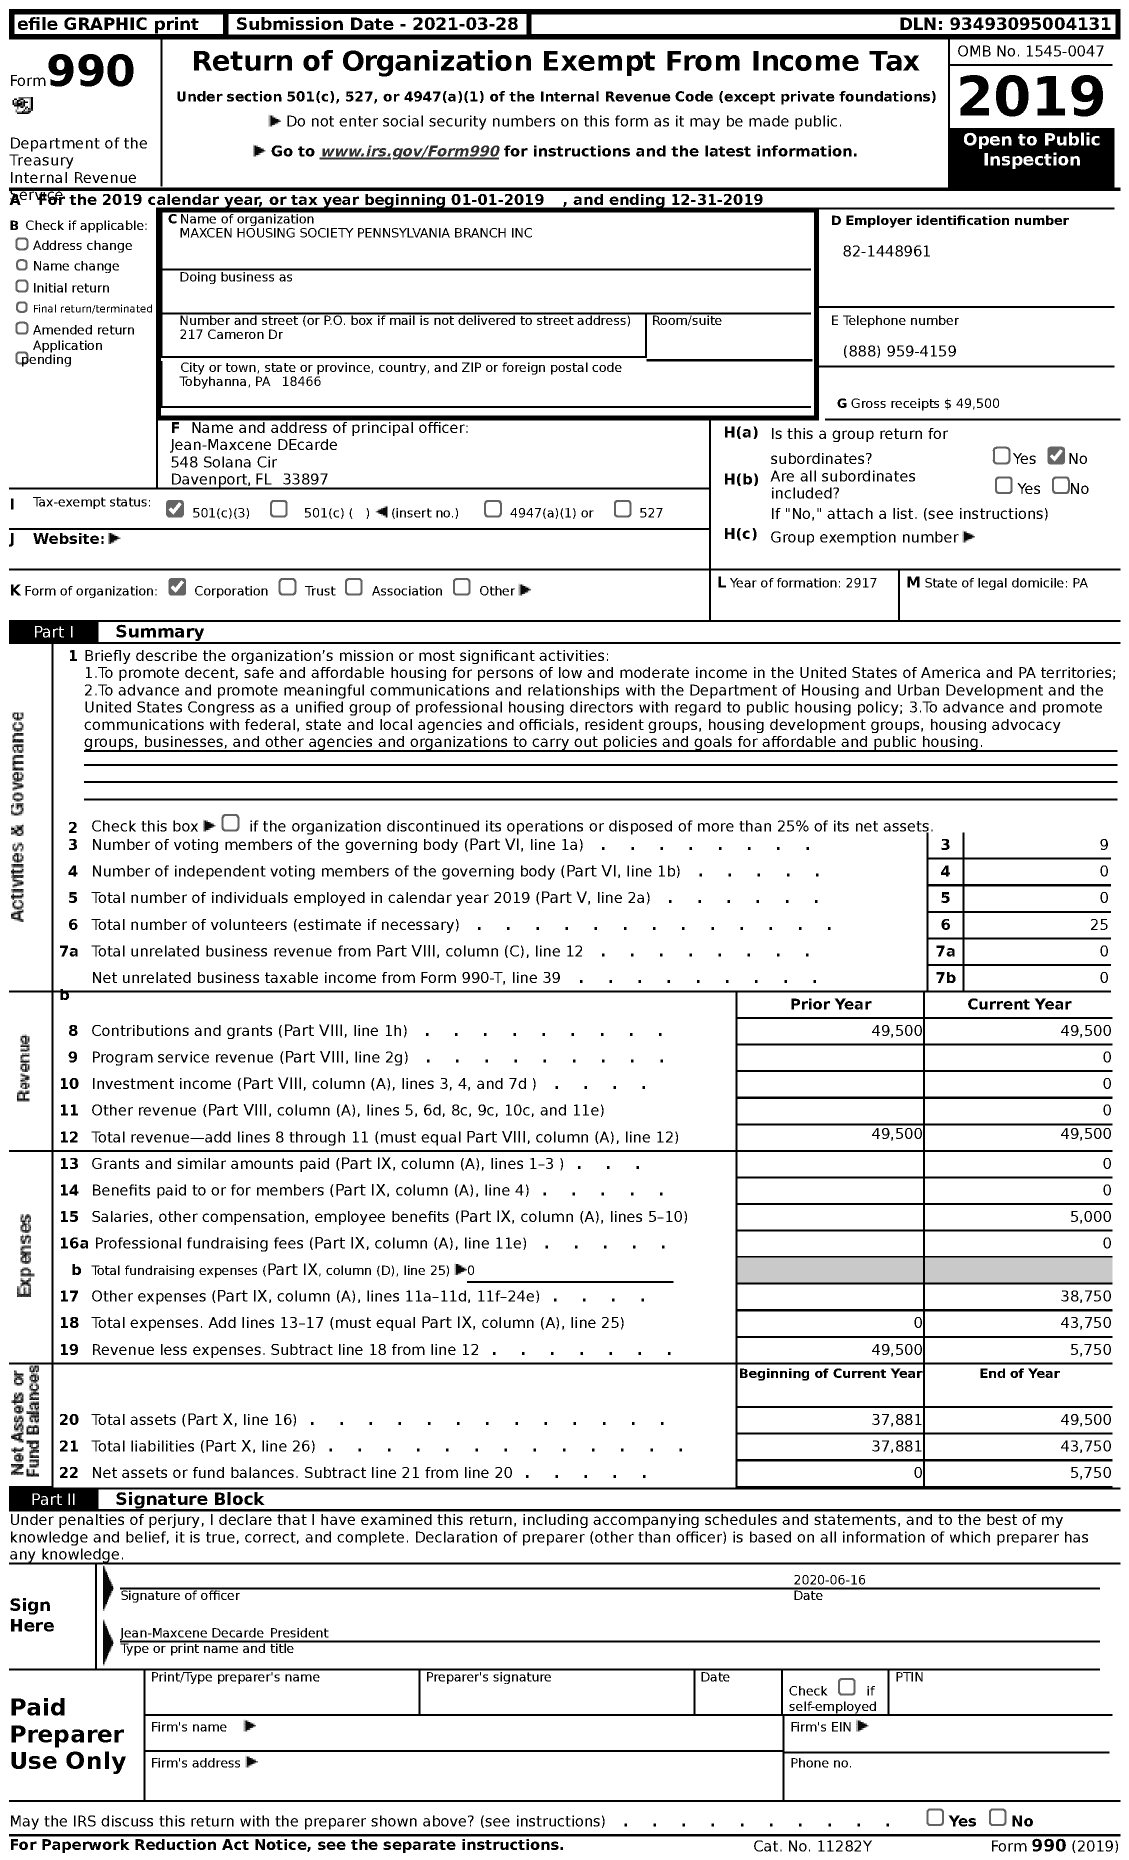 Image of first page of 2019 Form 990 for Maxcen Housing Society Pennsylvania Branch